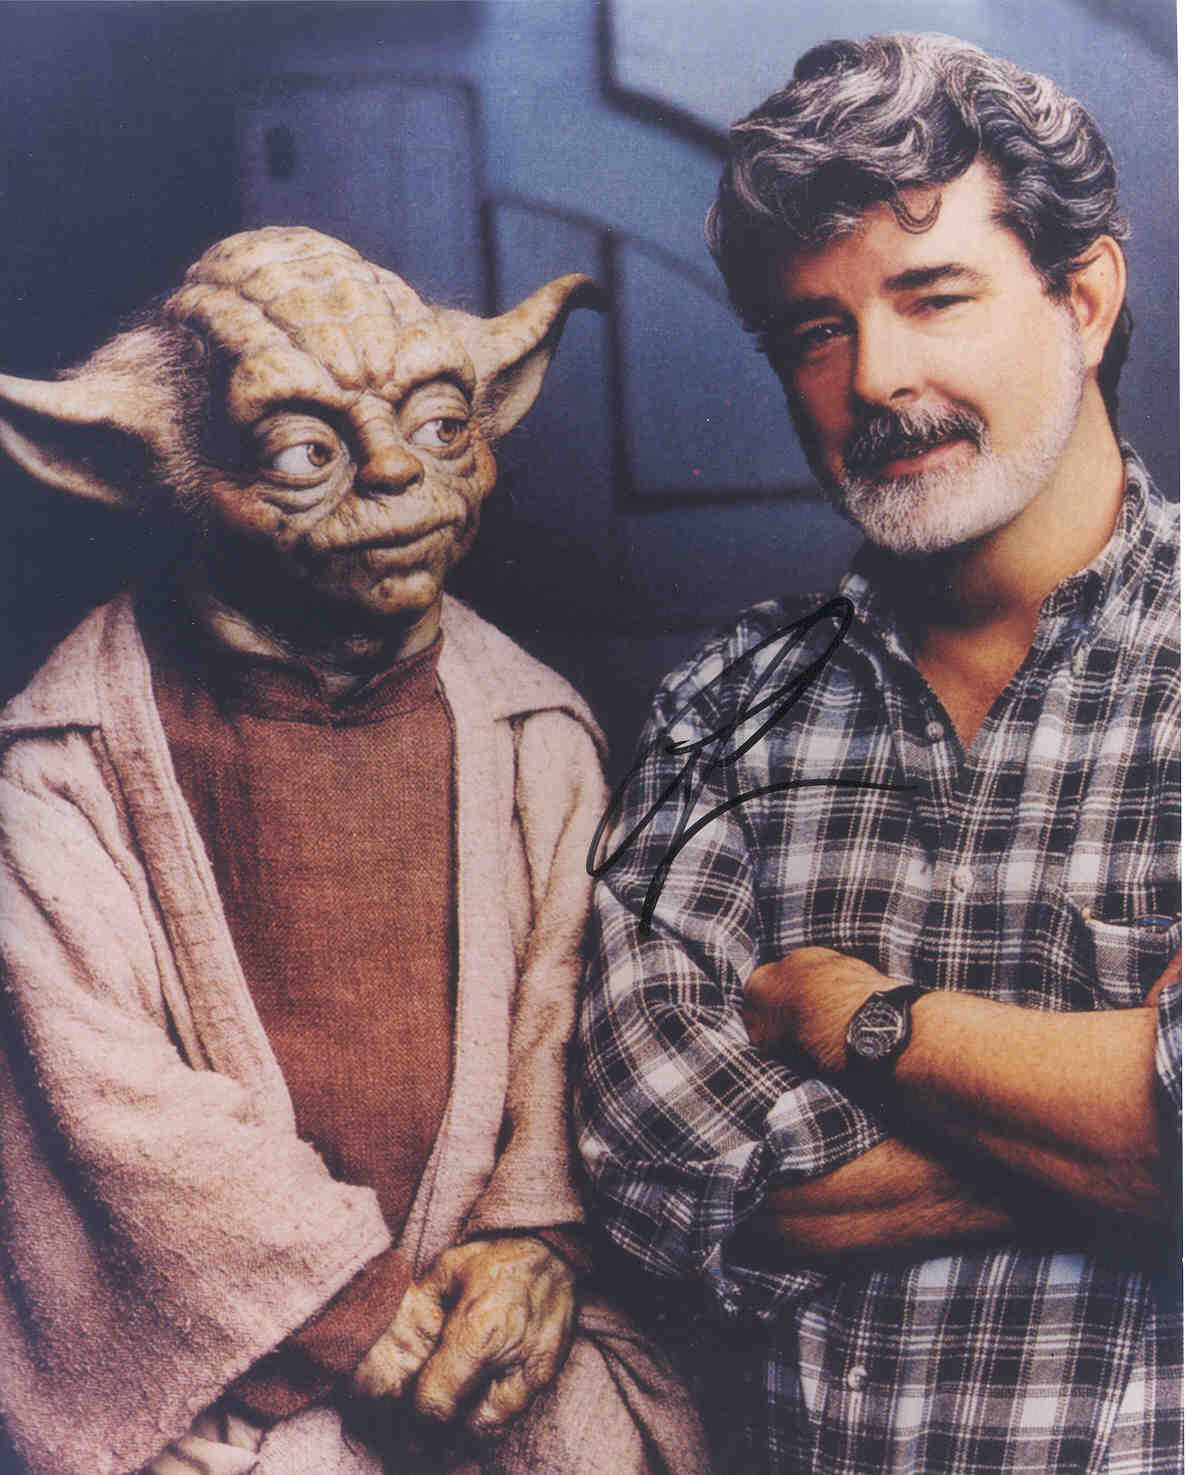 A picture of Yoda and George Lucas autographed by Lucas